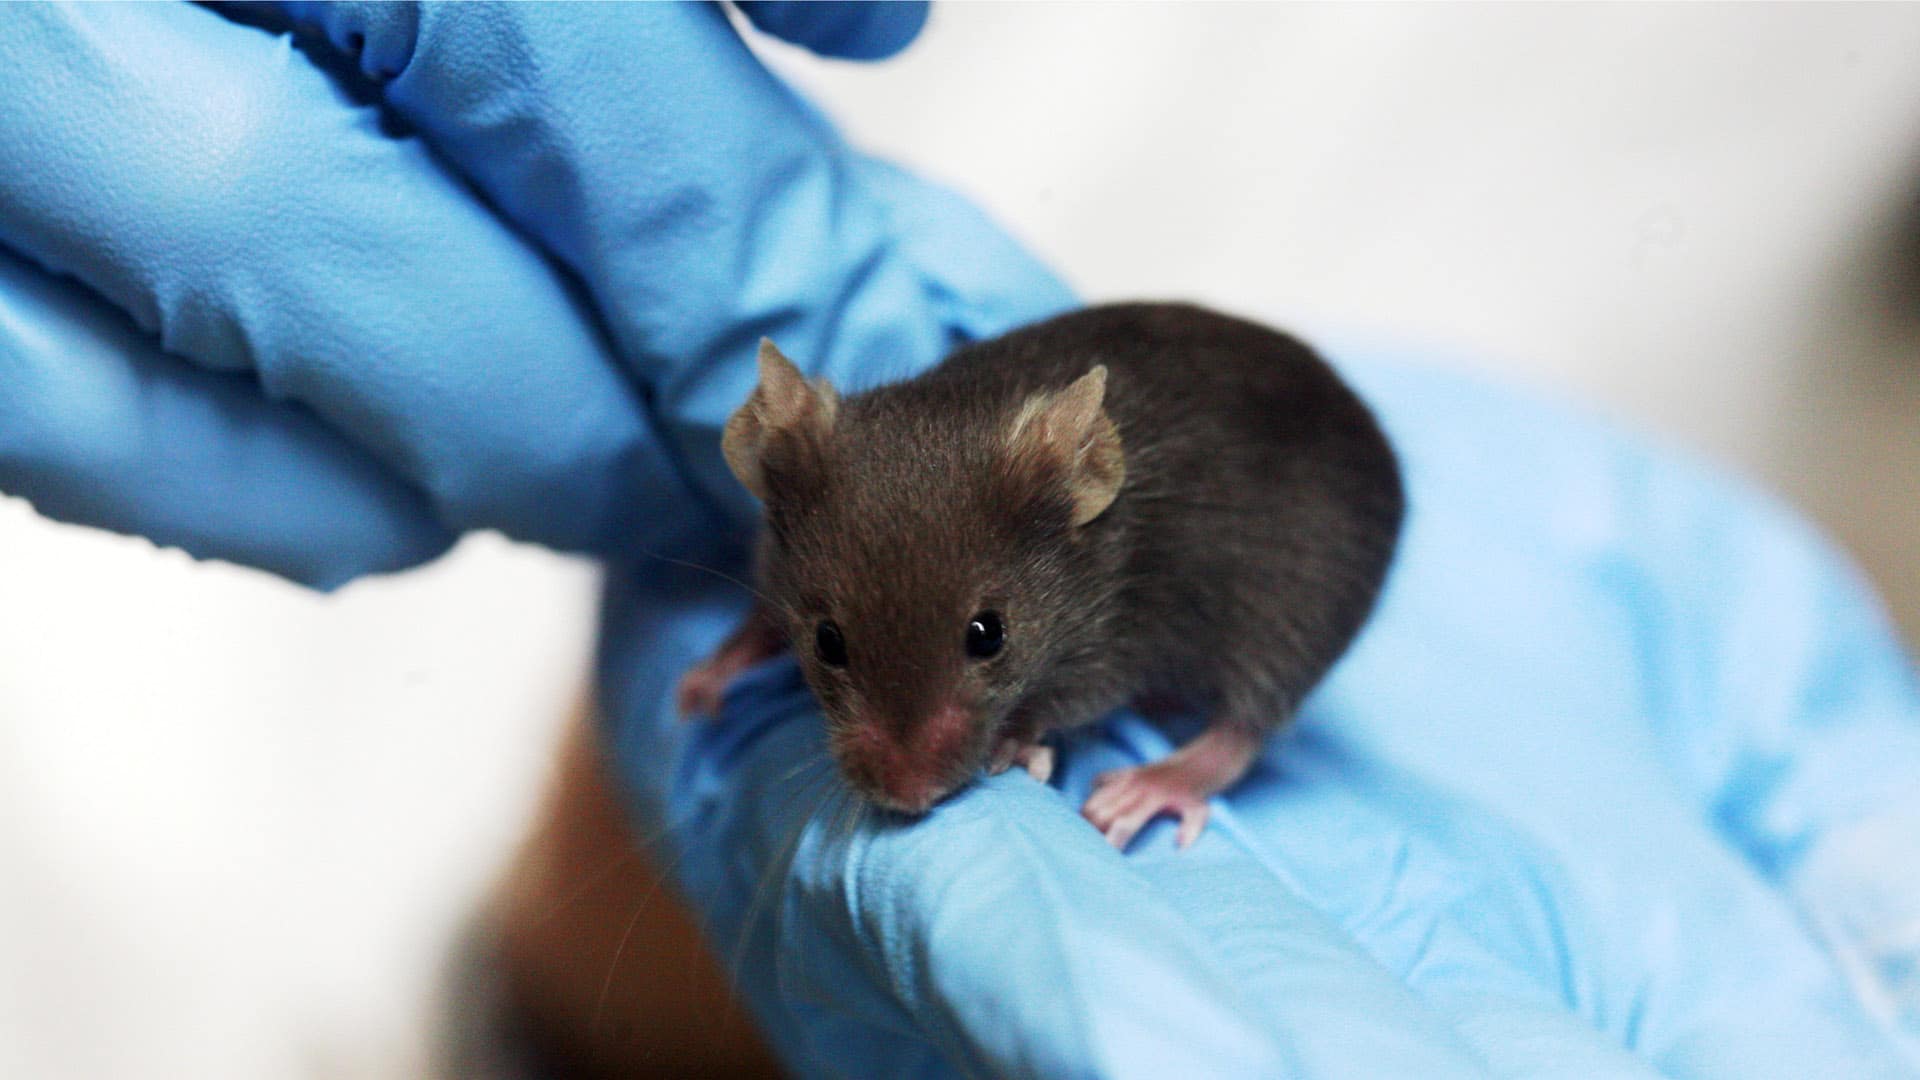 A brown mouse sits on the hand of a scientist wearing blue gloves.